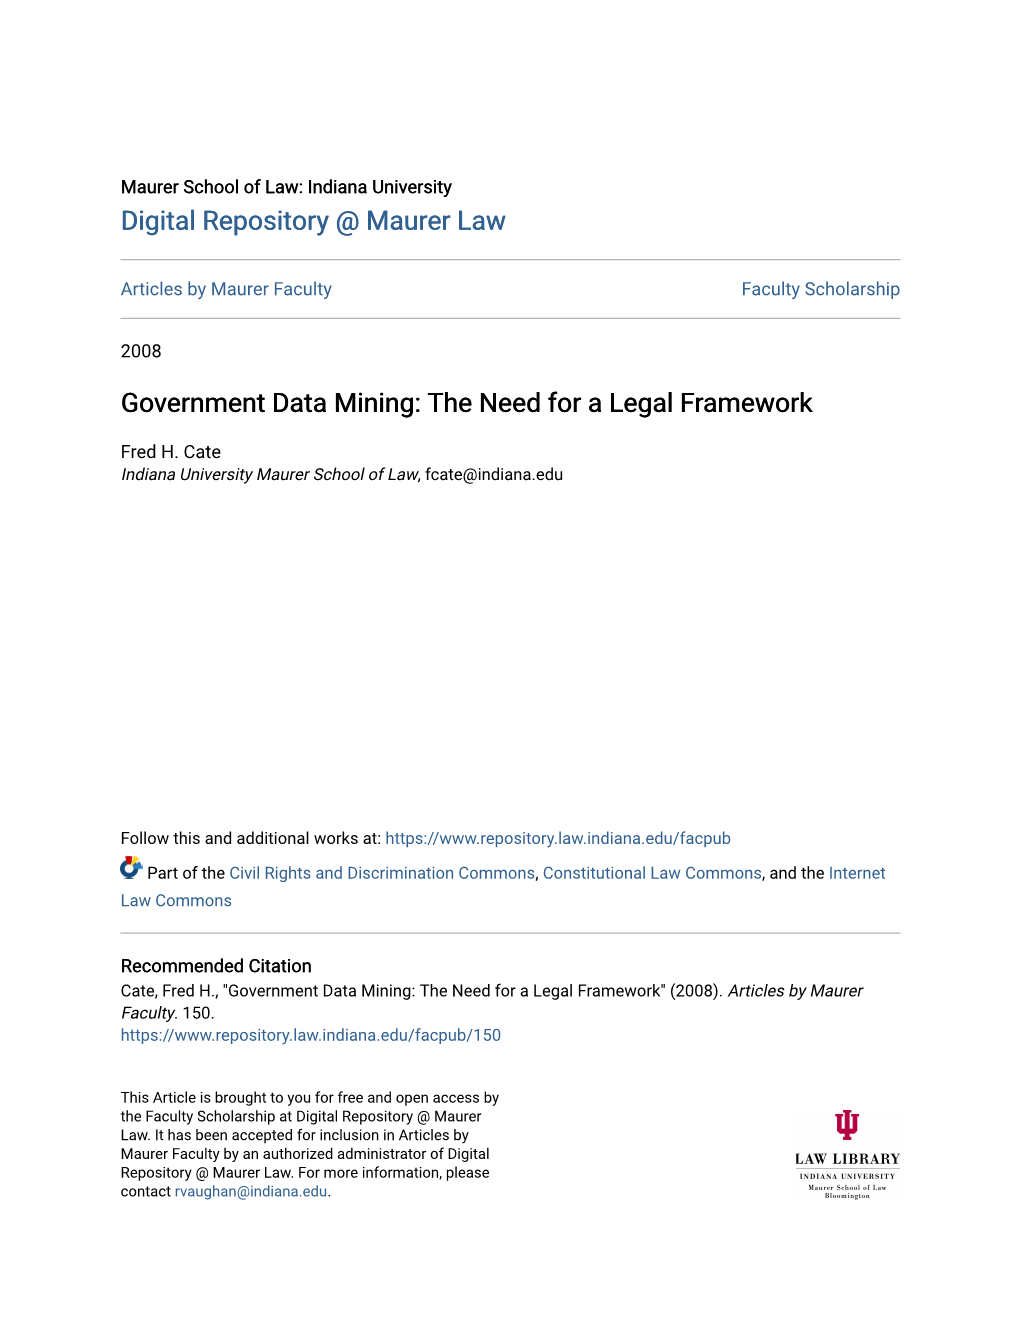 Government Data Mining: the Need for a Legal Framework